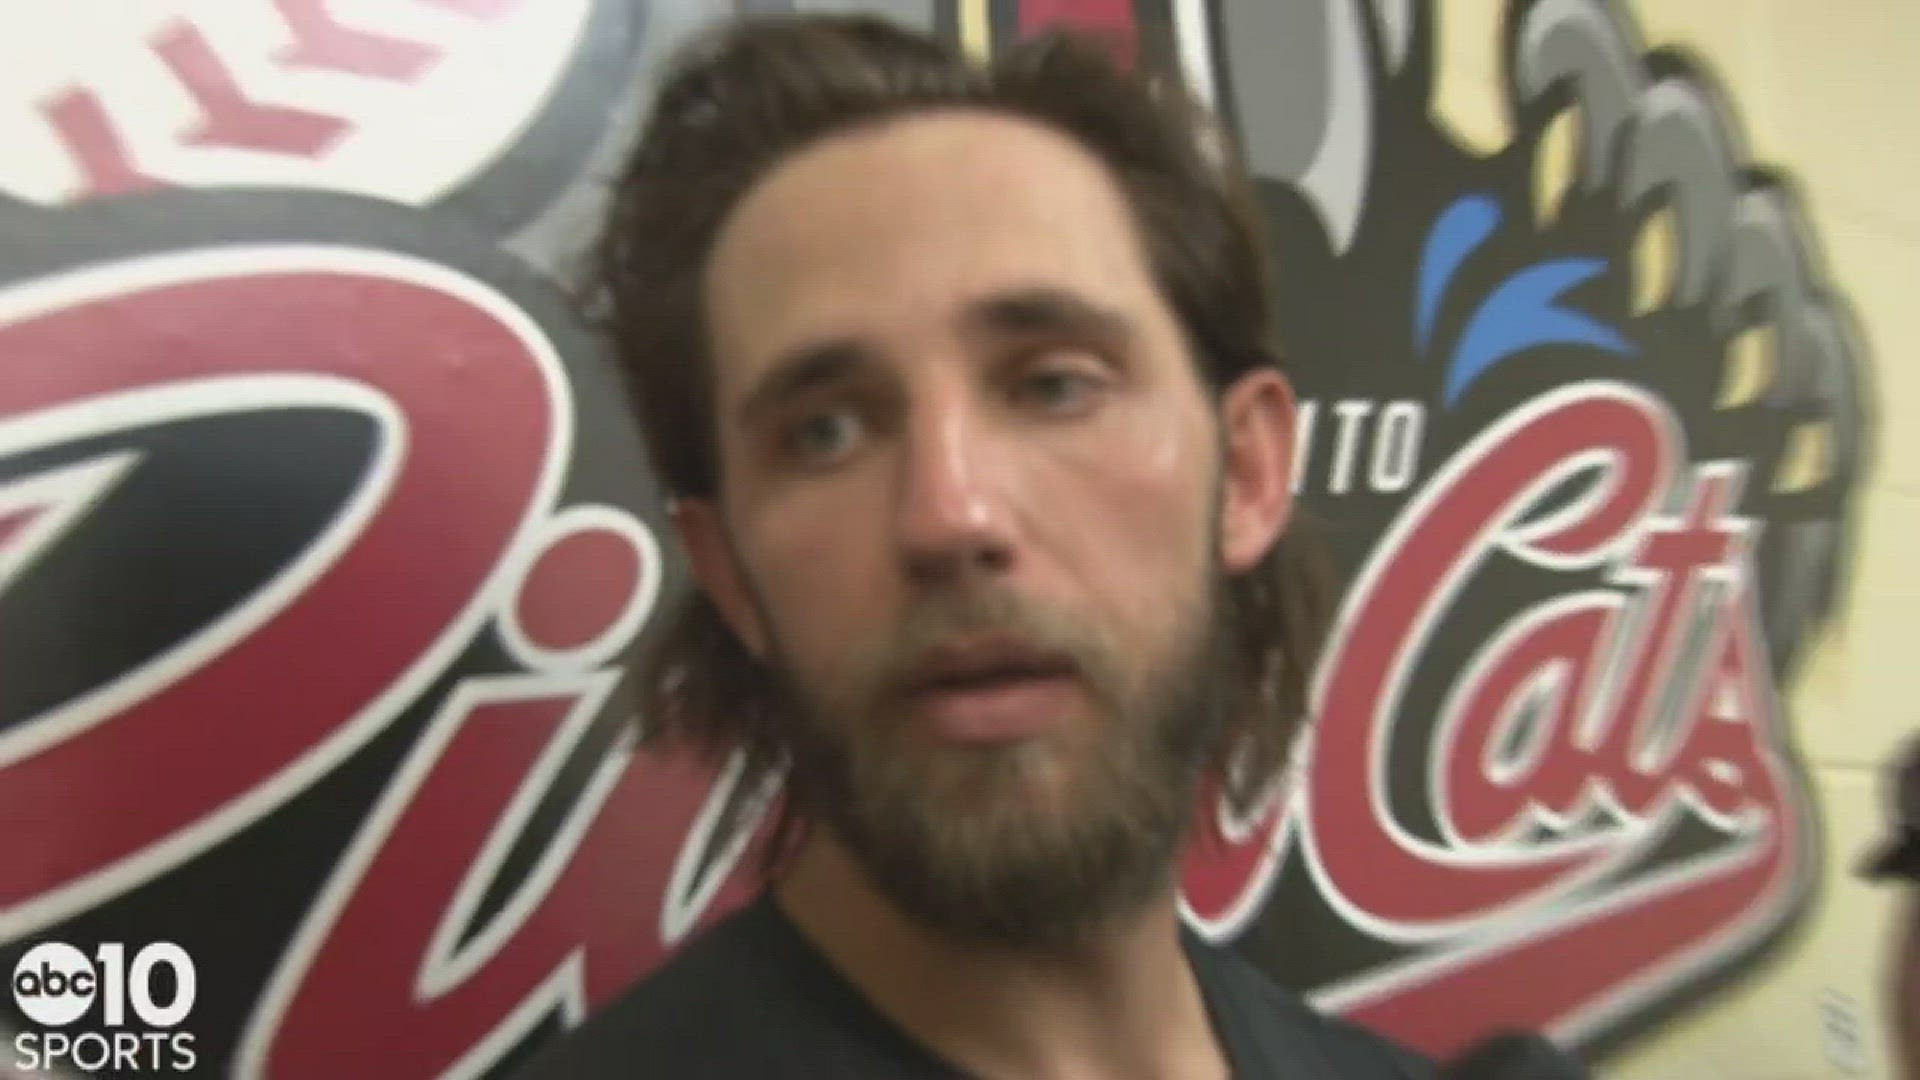 Giants ace pitcher Madison Bumgarner made his first rehabilitation appearance in Sacramento with the River Cats in front of a sold-out Raley Field crowd and talked about his journey back from injury and returning to San Francisco soon.